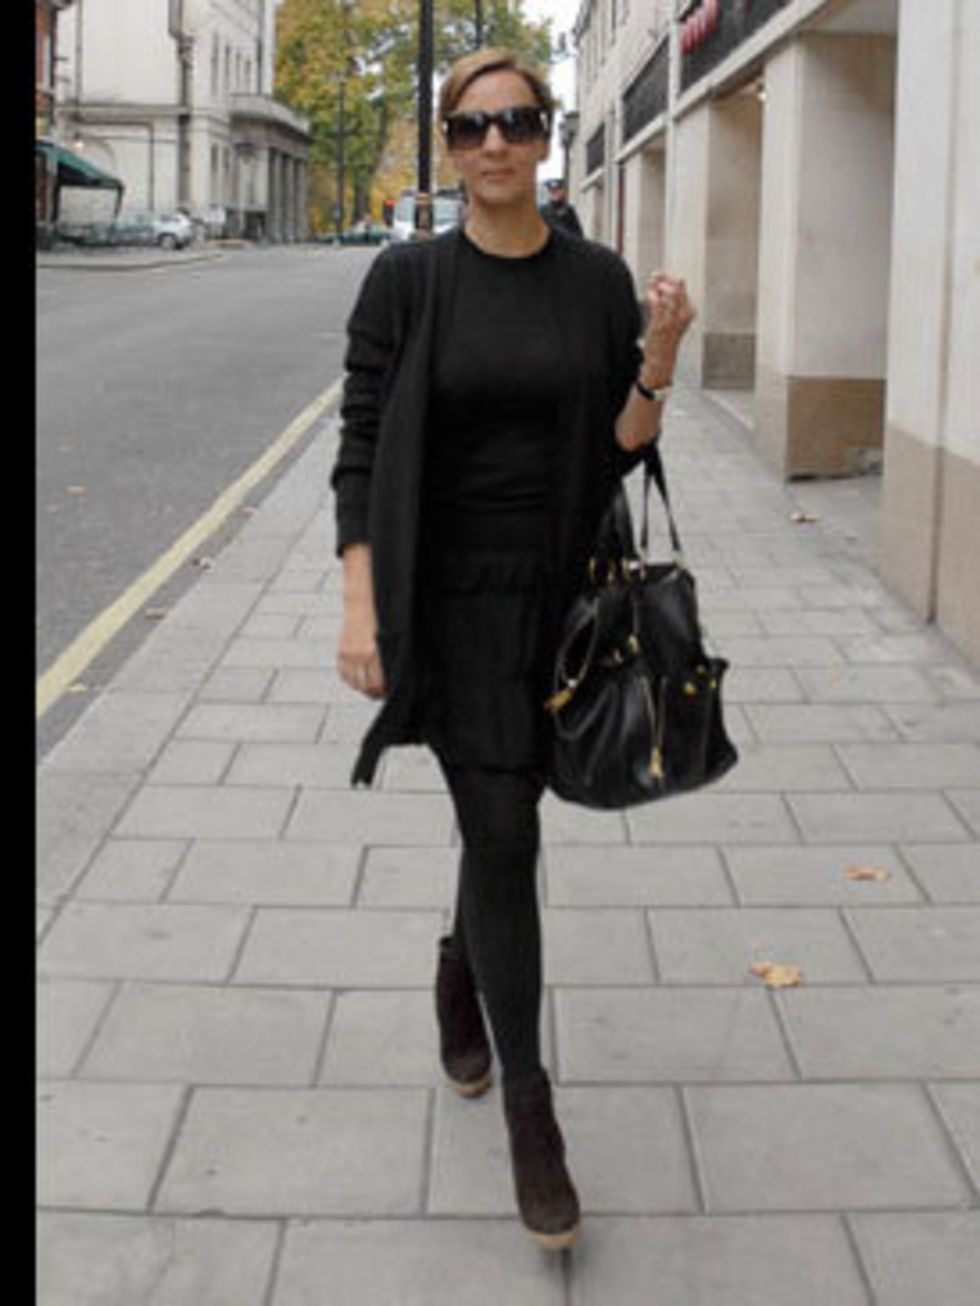 <p>Fashion Director Anne-Marie Curtis describes her look as Audrey Hepburn with a rock and roll edge. Mornings are hectic in her house so she plans her outfit the night before. She teams Gap cashmere with a Miu Miu tiered skirt and Christian Louboutin ank